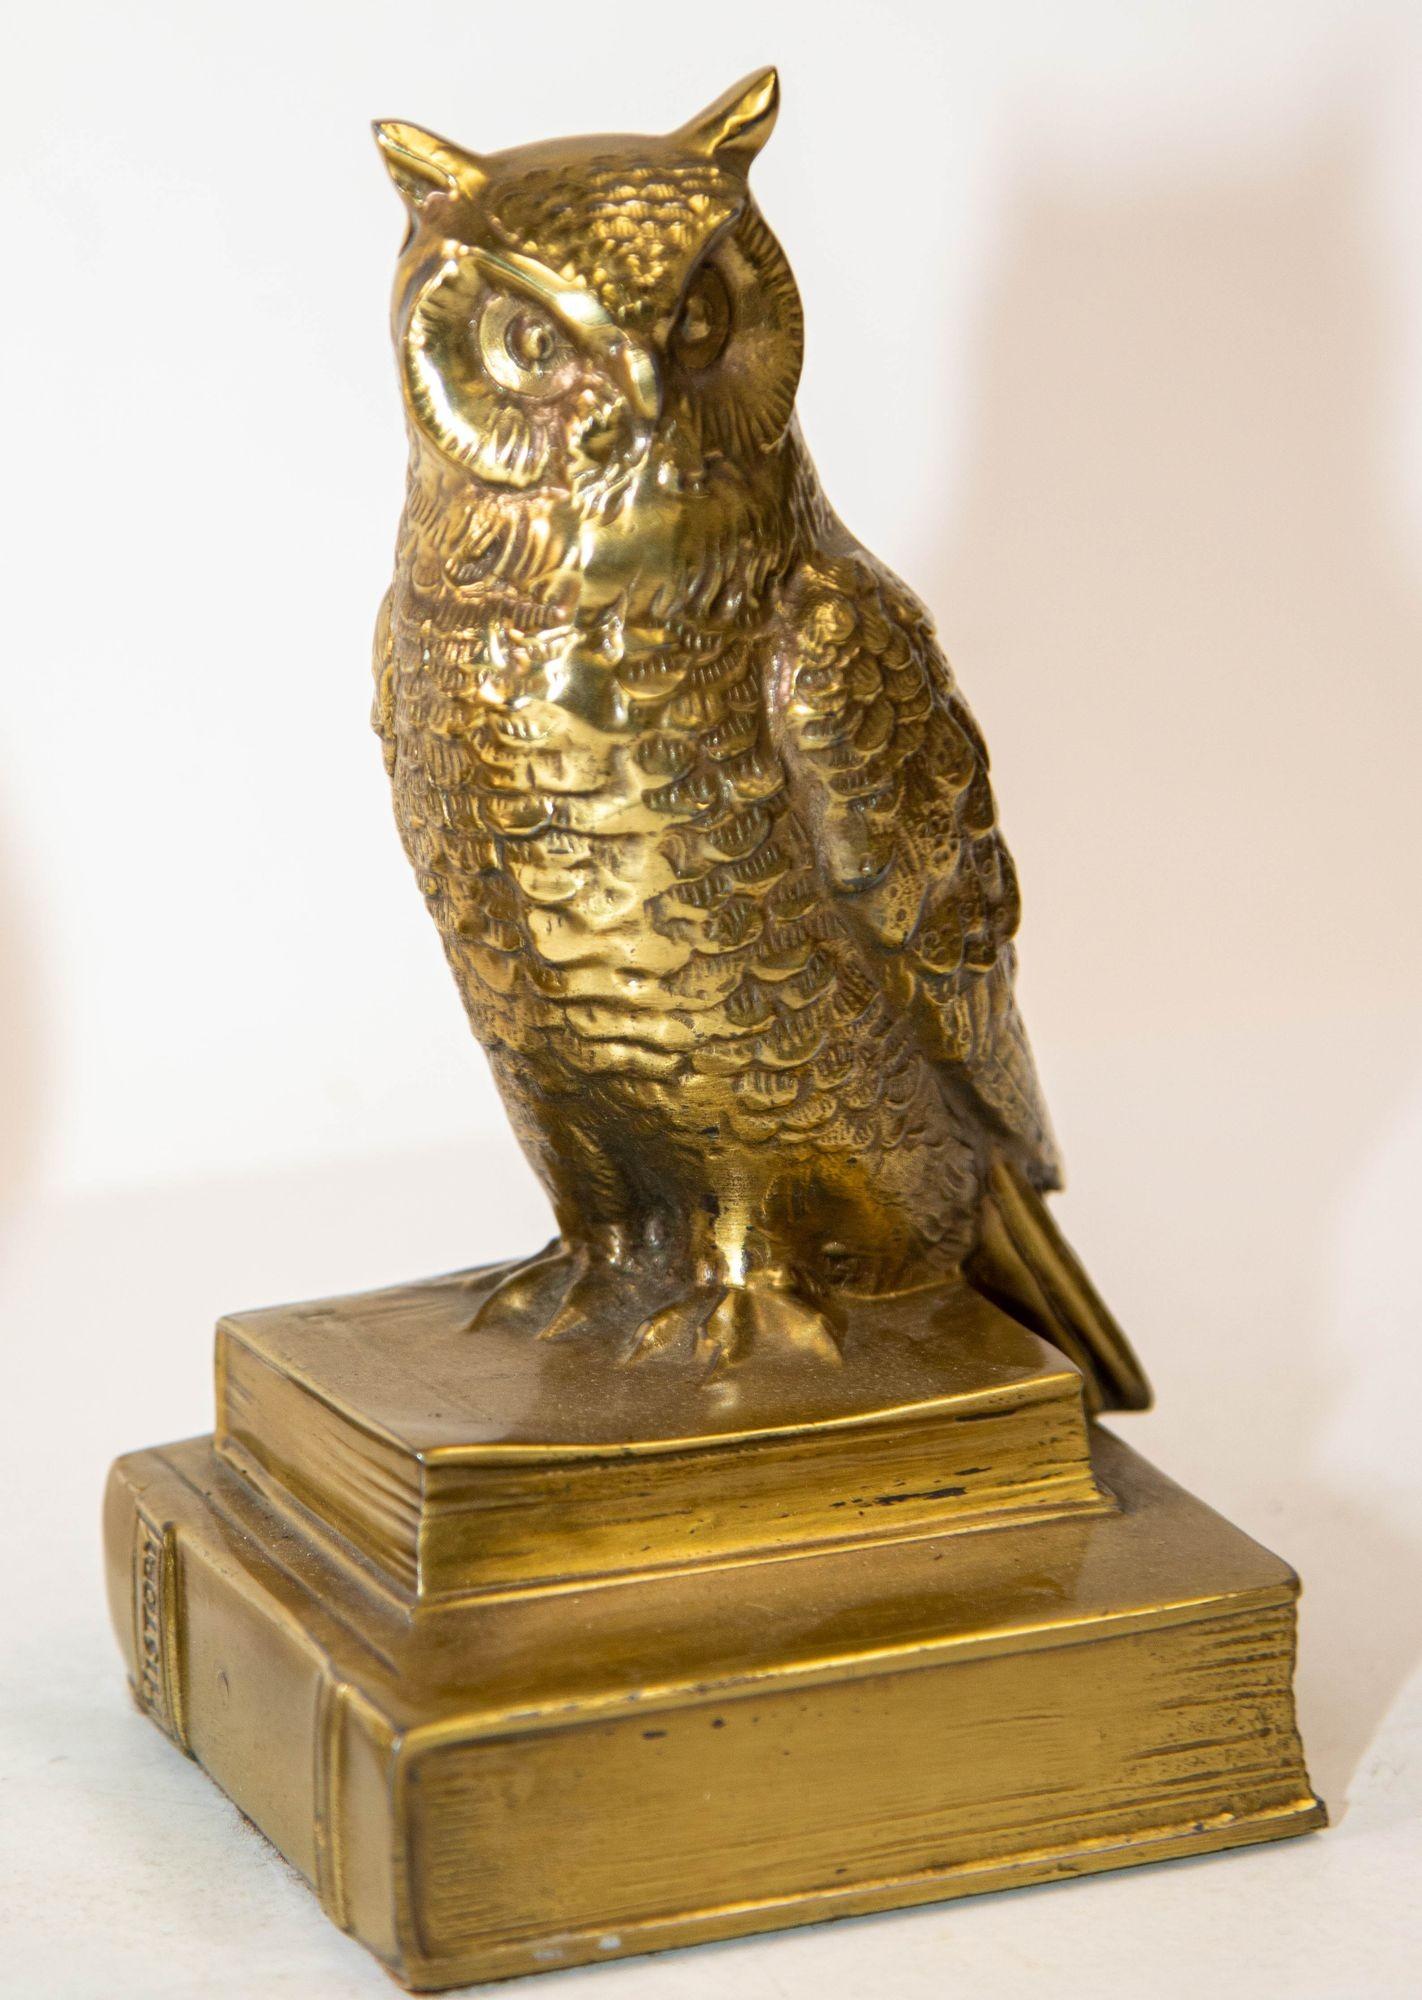 Vintage Cast Brass Owl Figurine Sculpture Bookends Mid-Century Modern 1950s In Good Condition For Sale In North Hollywood, CA